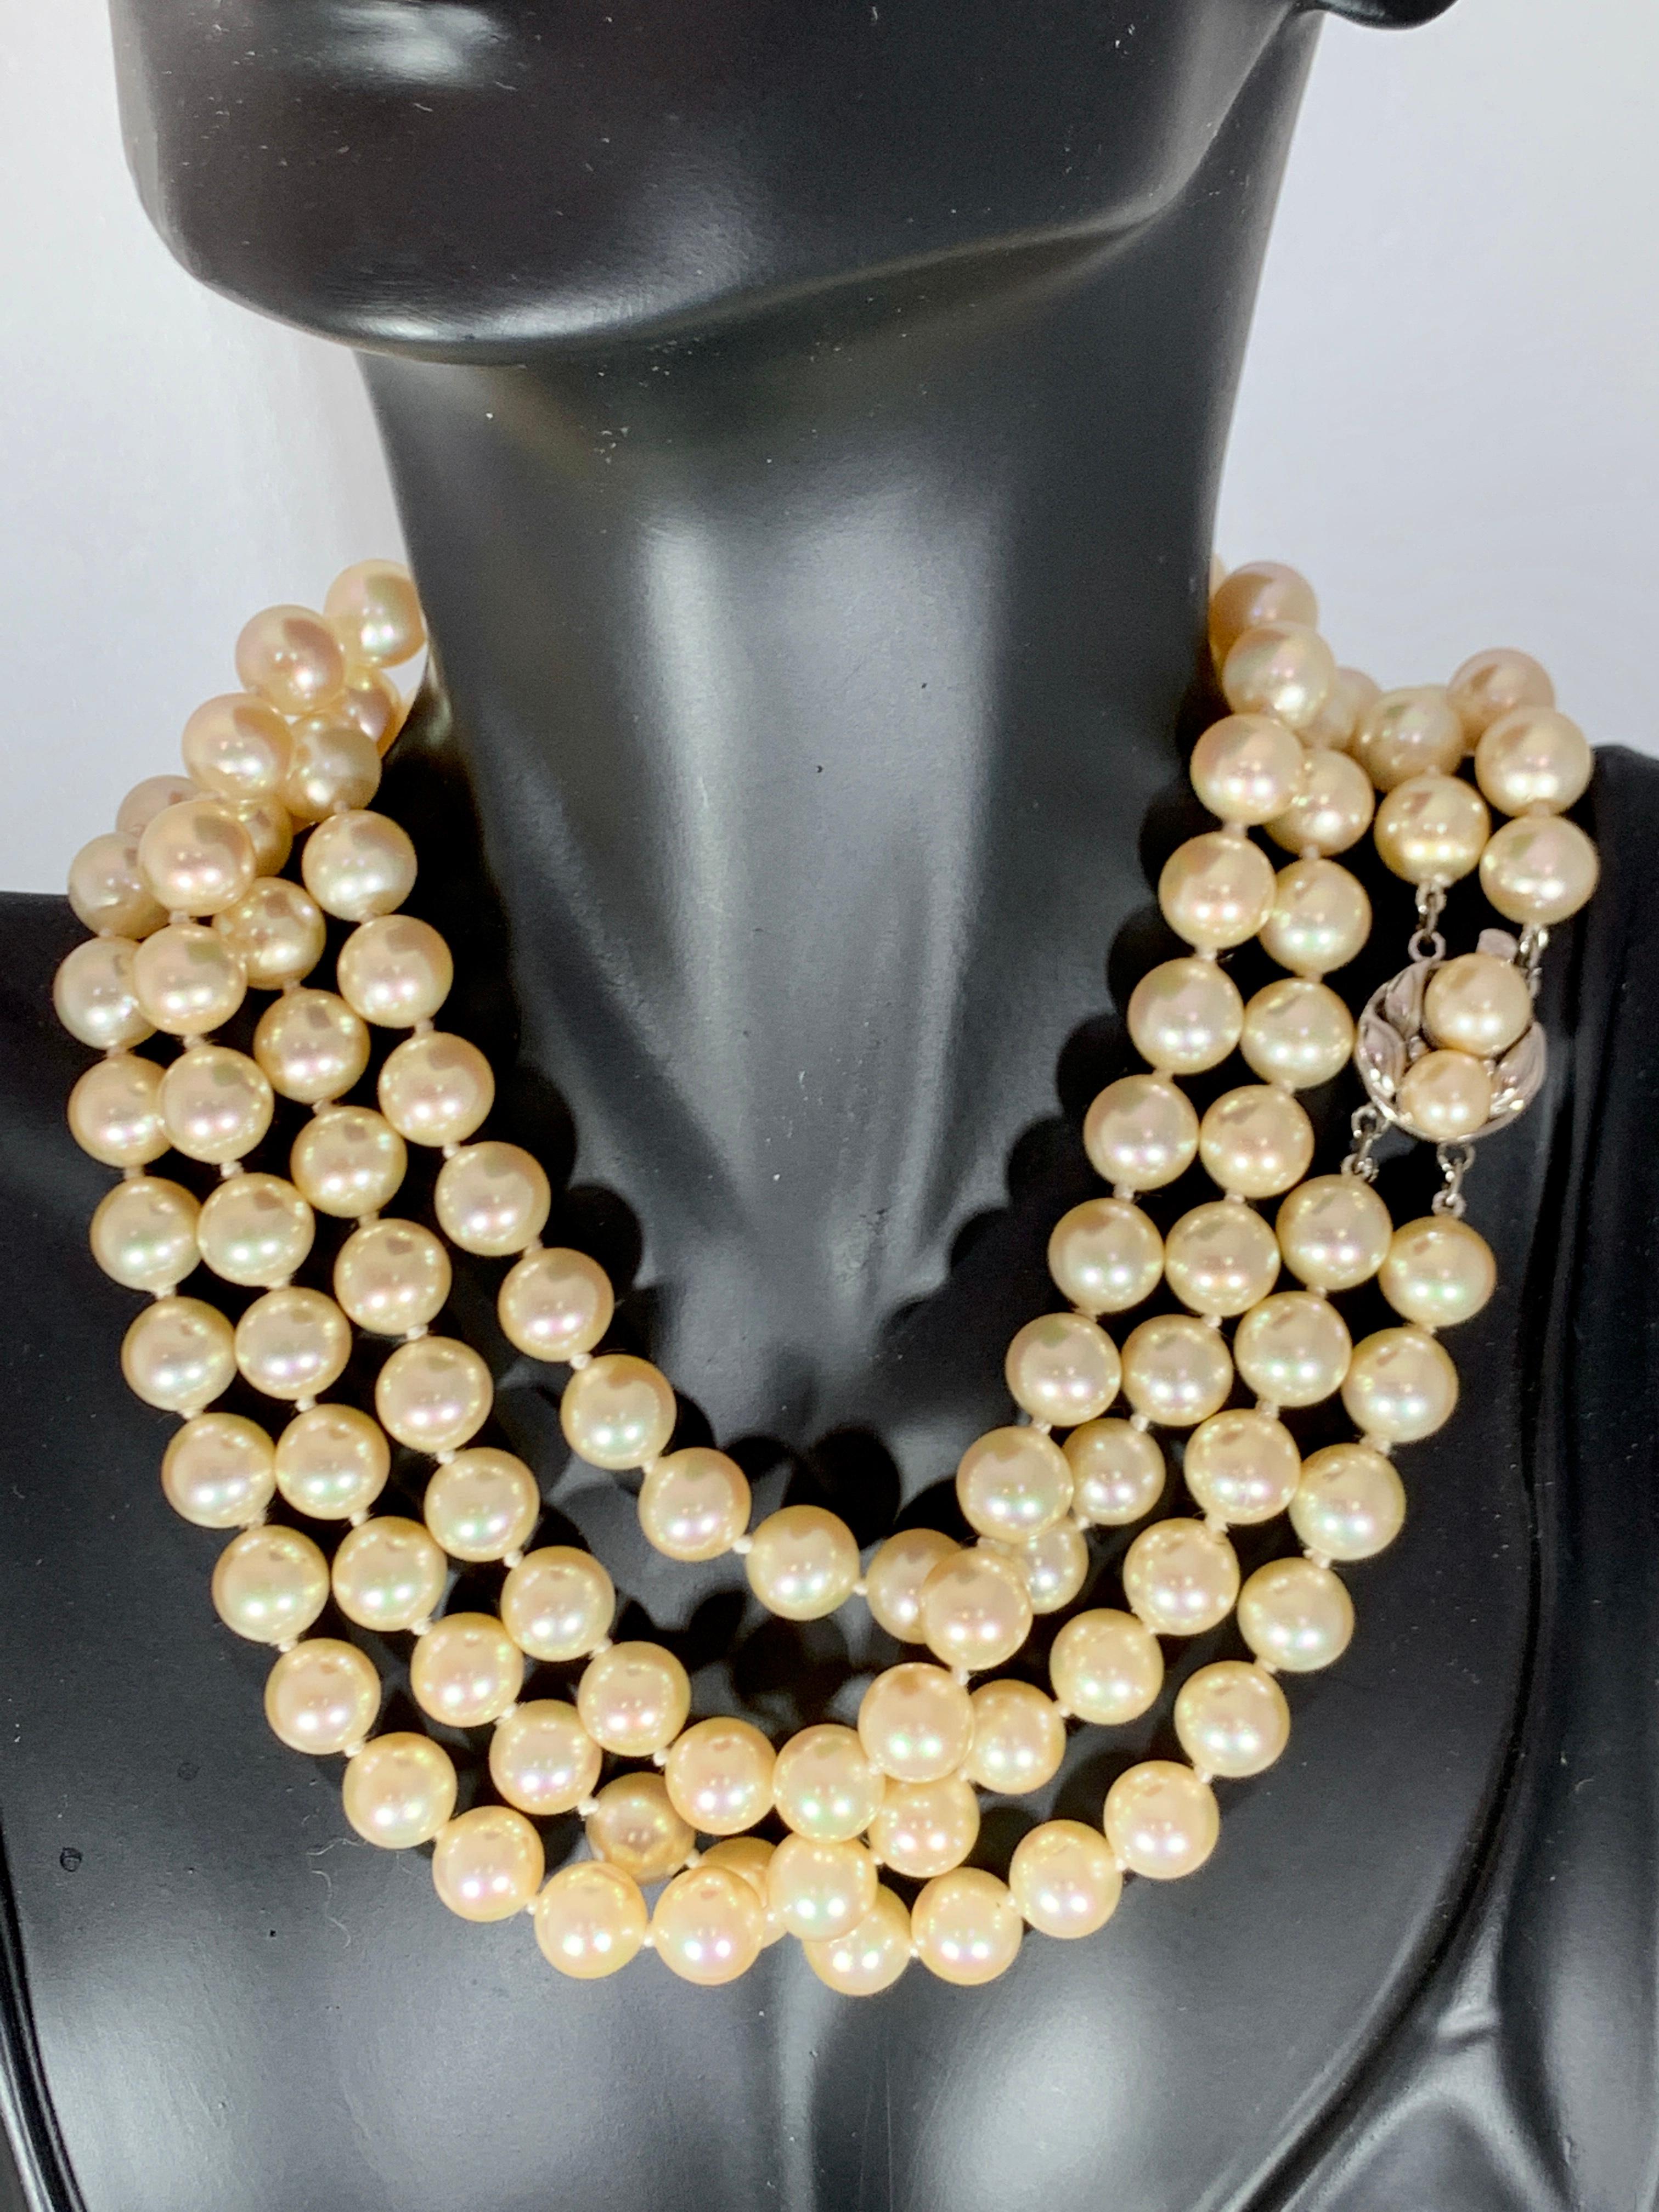 This marvelous vintage Pearl necklace features 2 row of luscious  Japanese Akoya   pearls
(measuring approx. 8.25mm -8. 75mm)   Pearl Gemstone in the clasp.
Cremish Yellow color
VINTAGE

PRE-OWNED 
 ESTATE PIECE
Sterling Silver Clasp
Clasp is